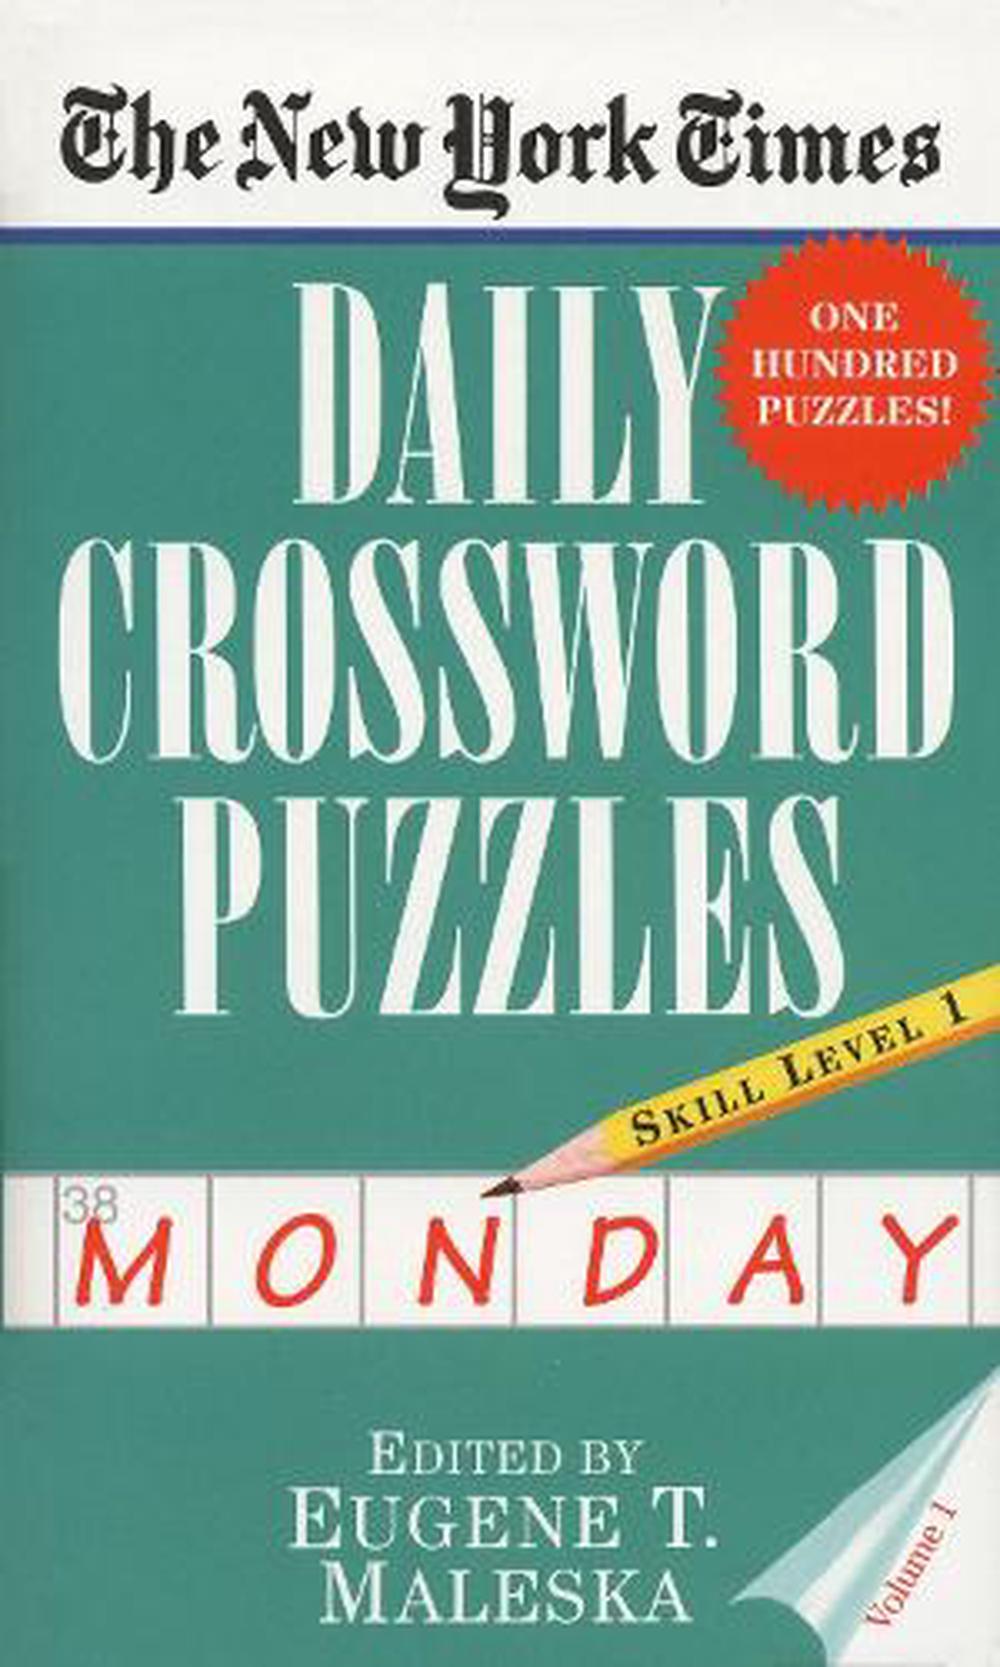 the-new-york-times-daily-crossword-puzzles-monday-volume-i-by-eugene